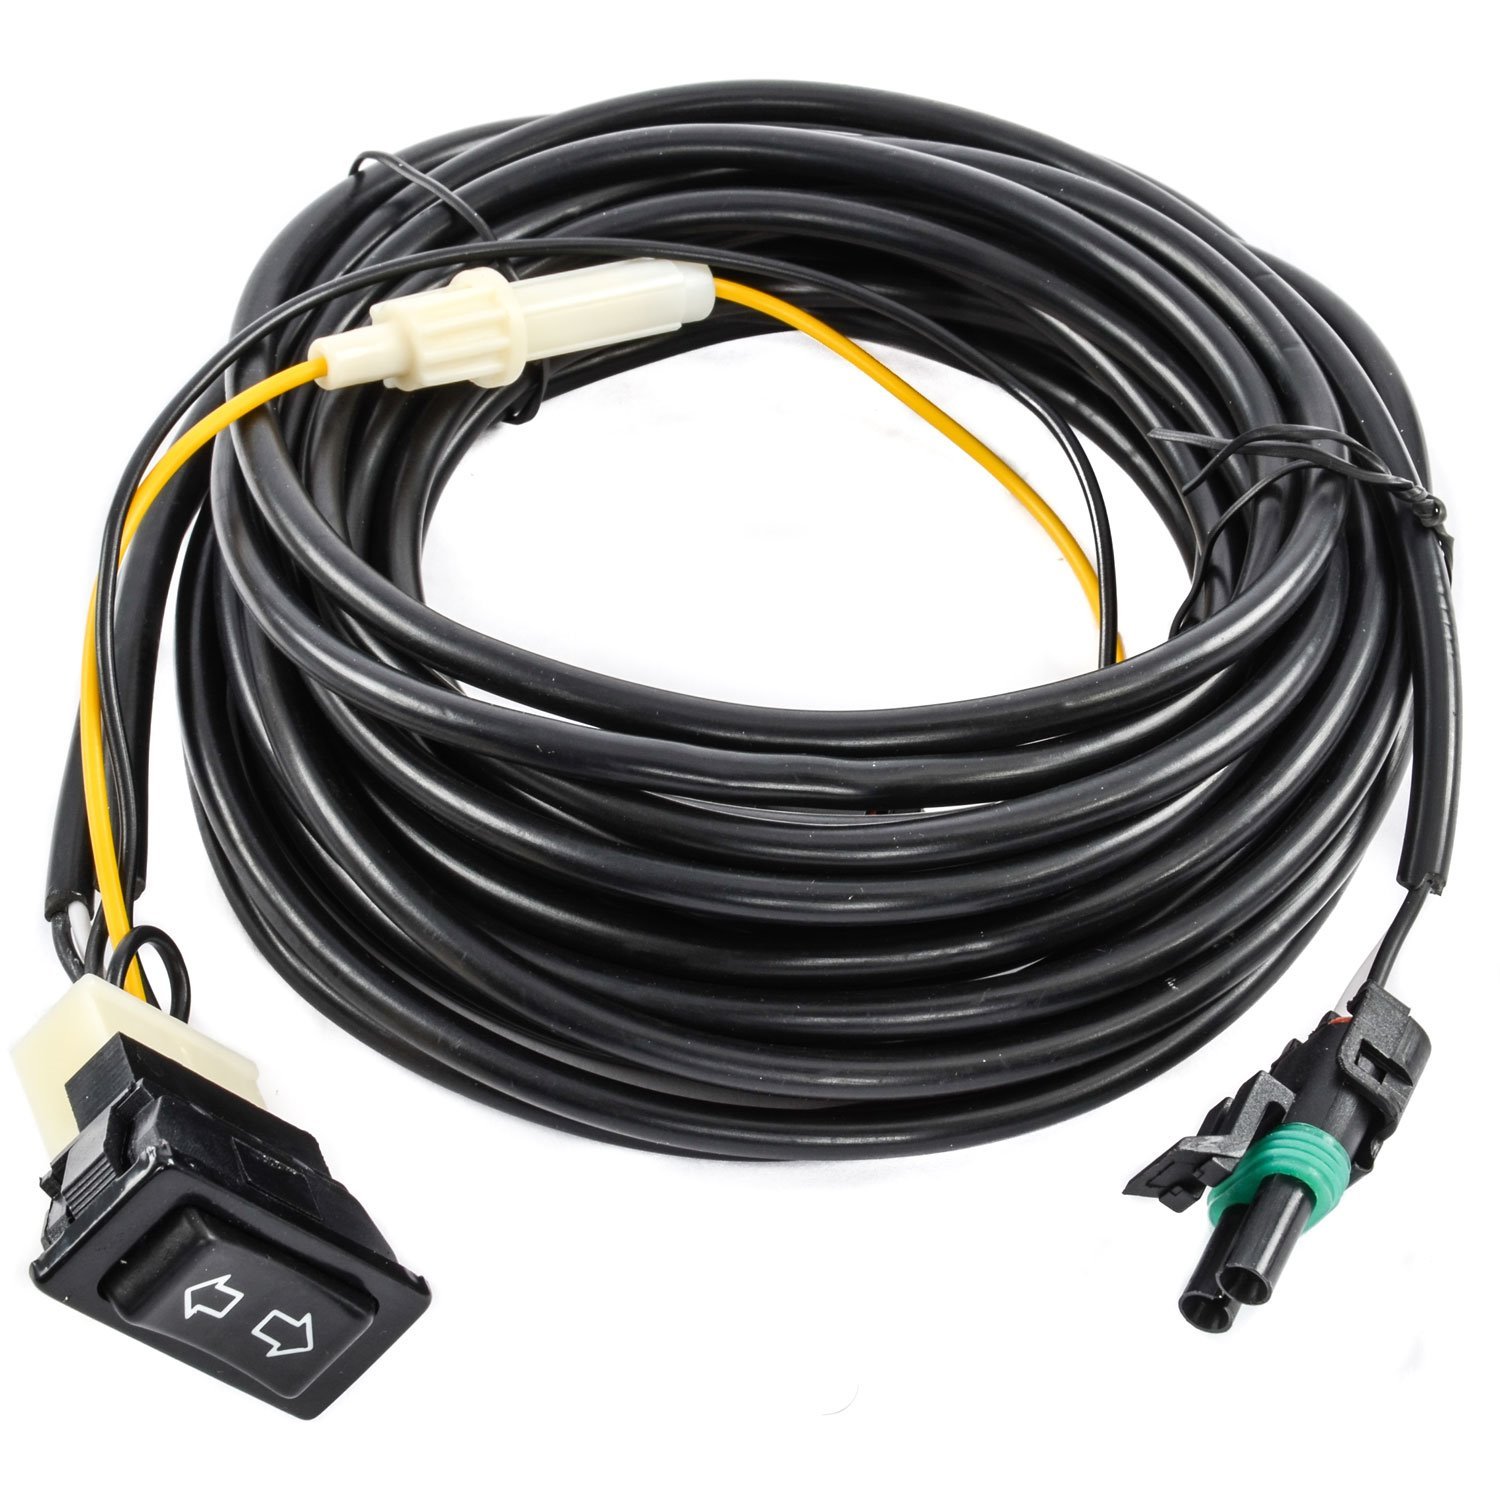 Replacement 15 ft. Wiring Harness and Switch Fits JEGS Single Exhaust Cutouts 555-30880 and 555-30882